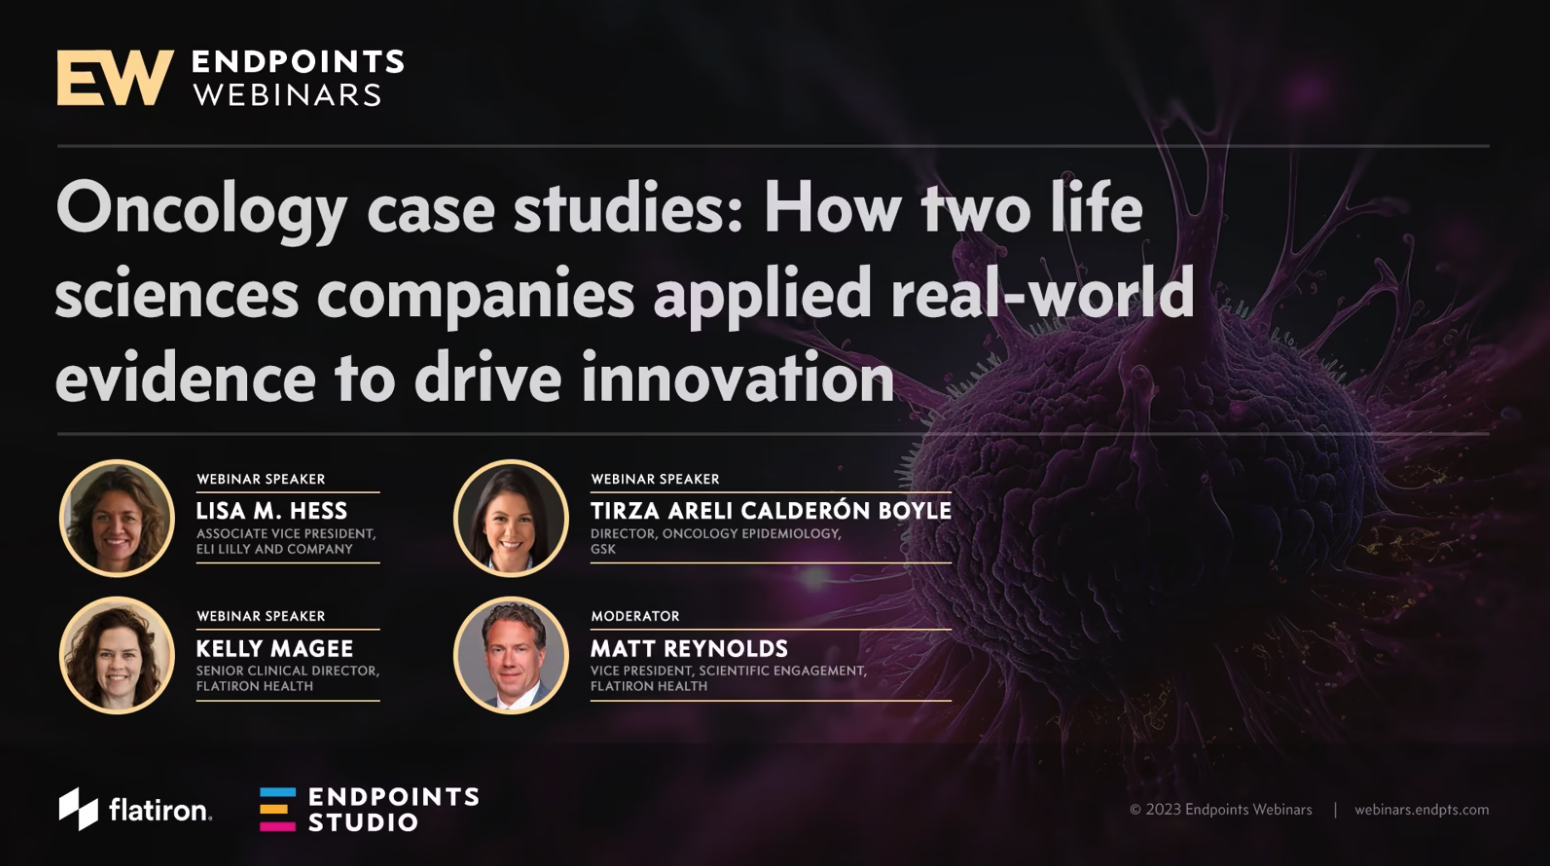 Oncology case studies: How two life sciences companies applied real-world evidence to drive innovation